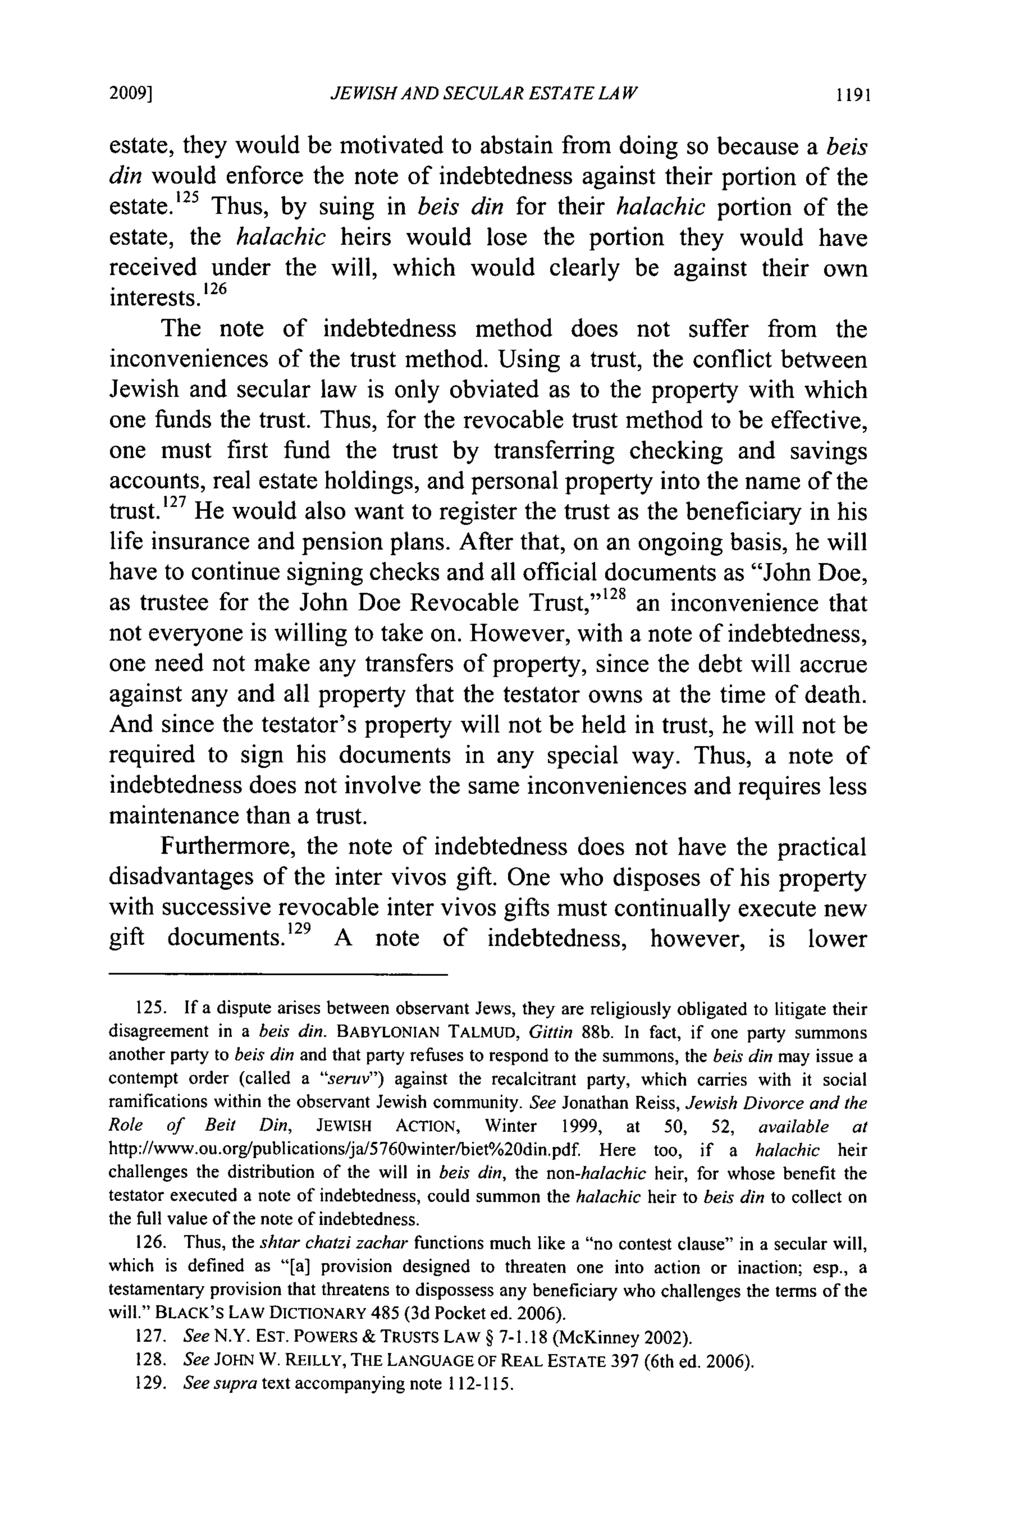 2009] Wolf: Resolving the Conflict Between Jewish and Secular Estate Law JEWISH AND SECULAR ESTATE LAW estate, they would be motivated to abstain from doing so because a beis din would enforce the